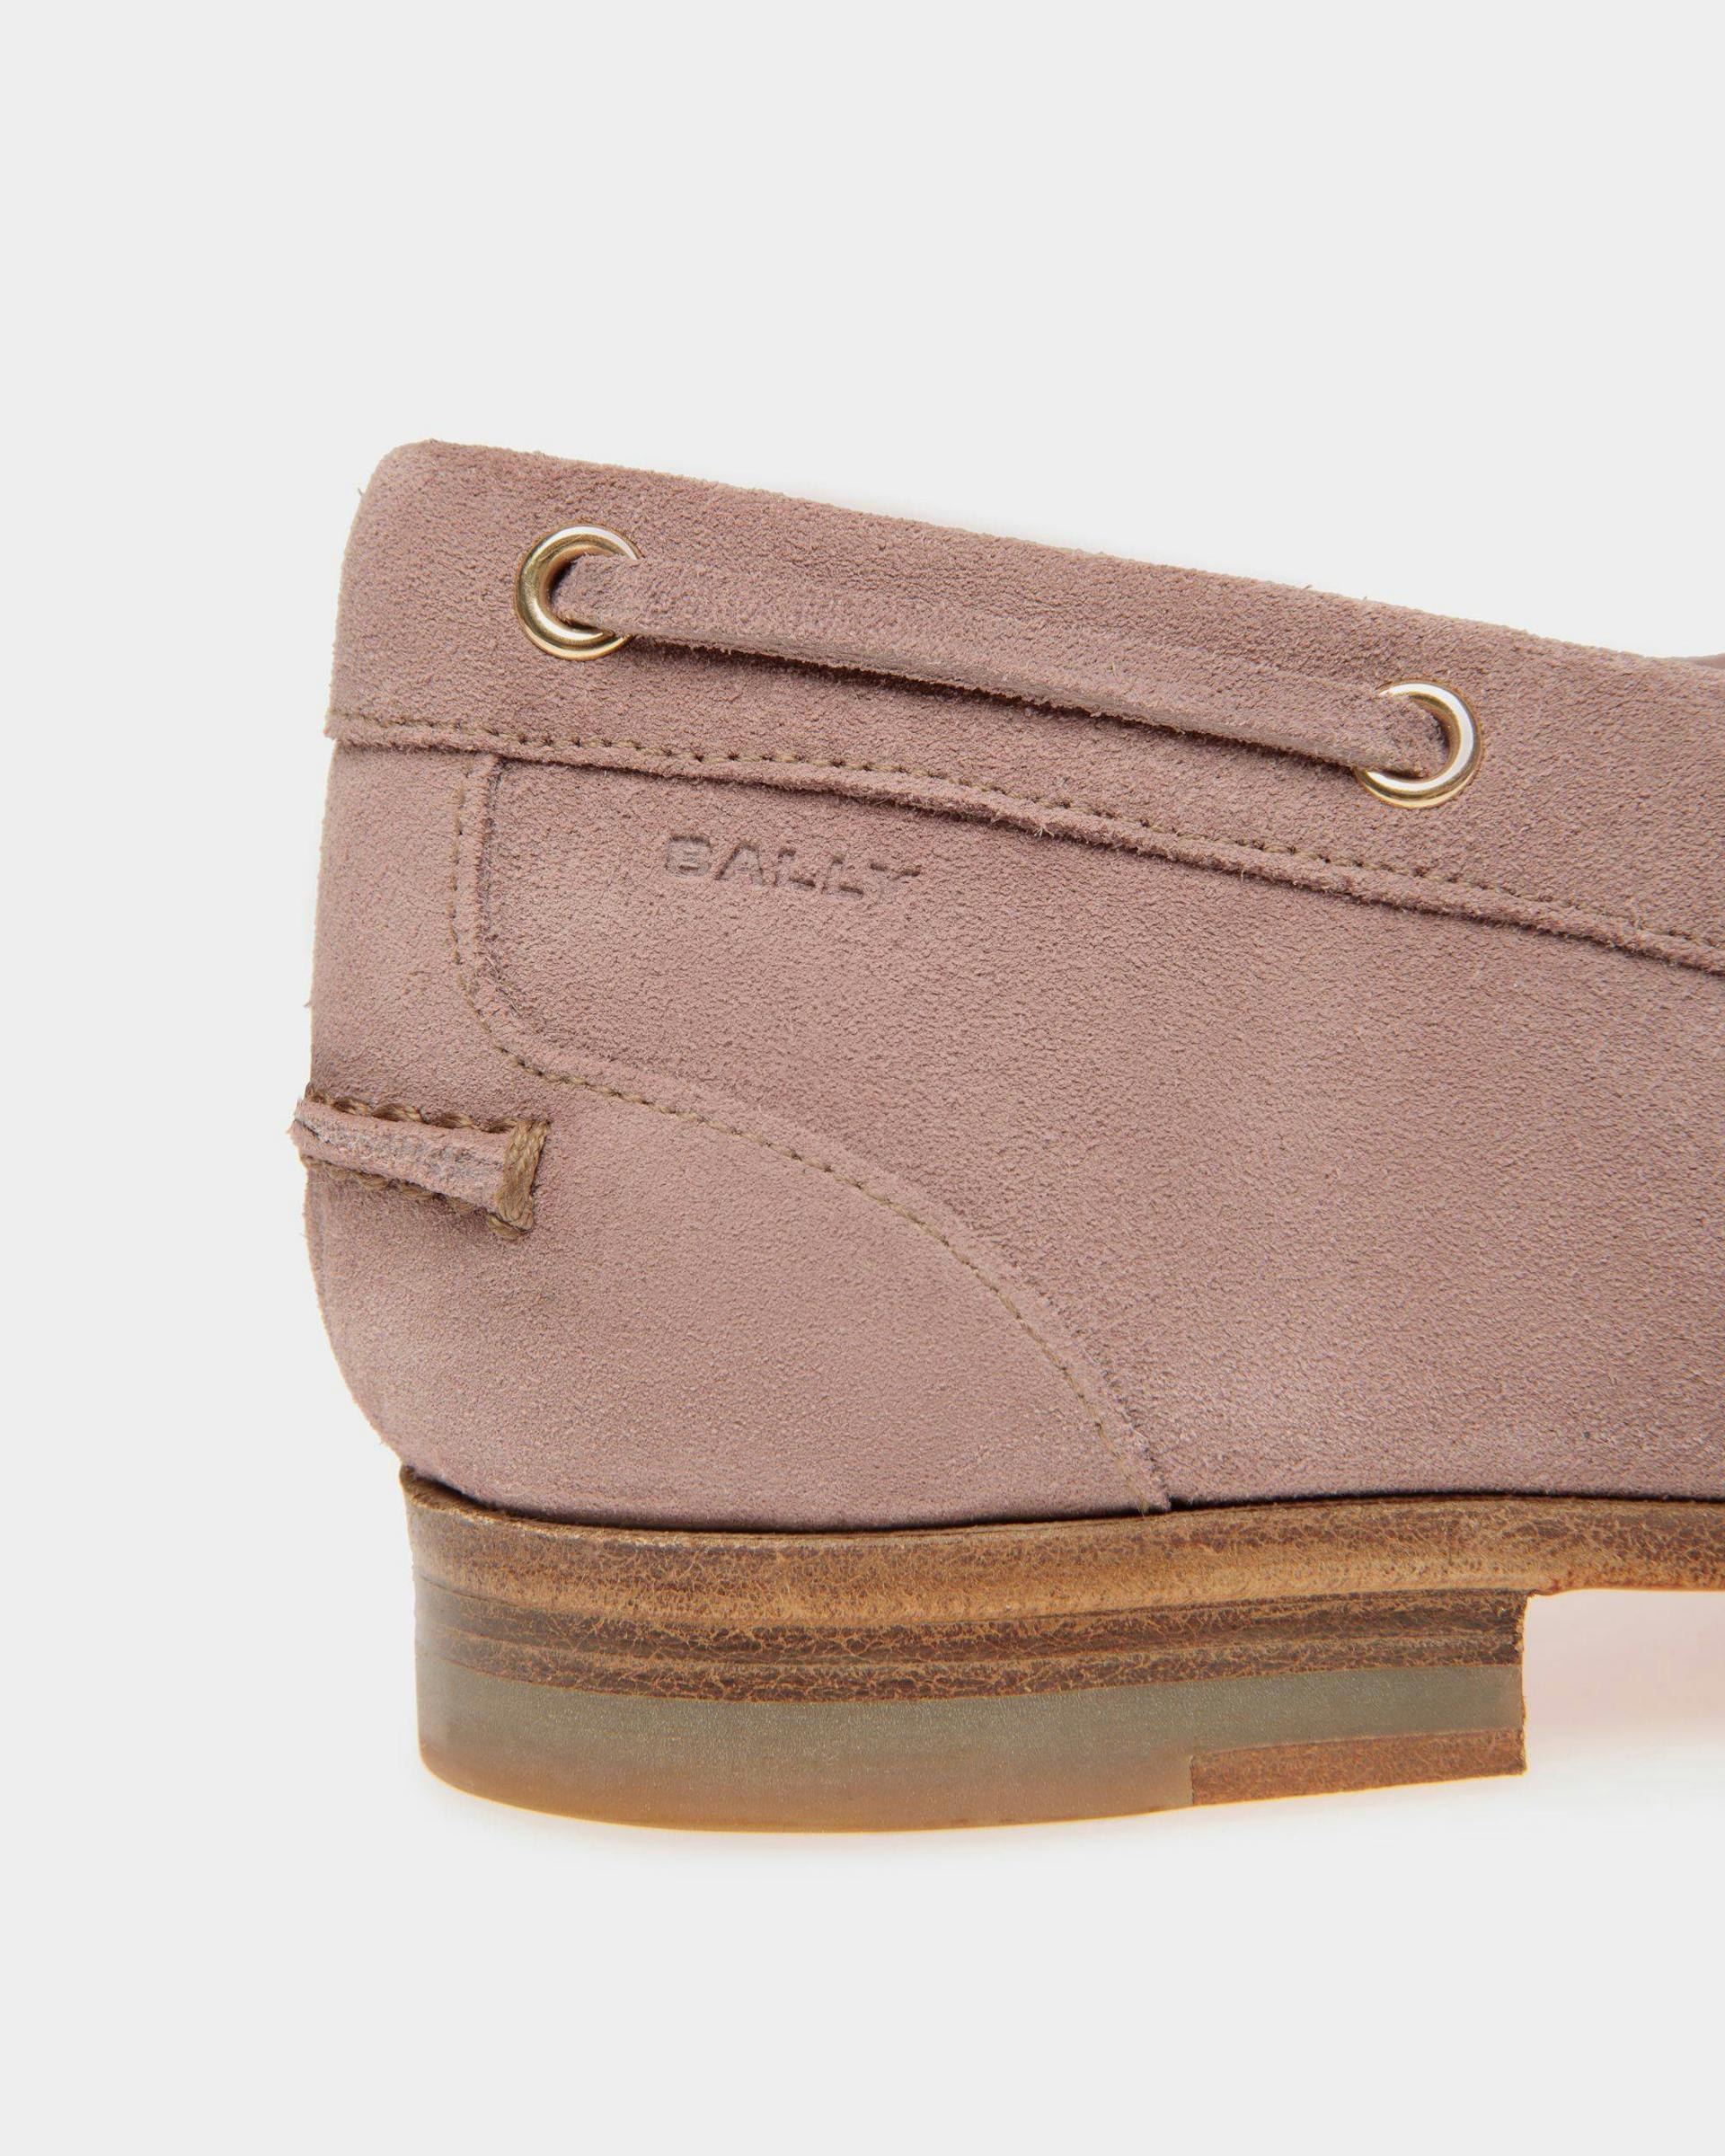 Women's Plume Moccasin in Light Mauve Suede | Bally | Still Life Detail